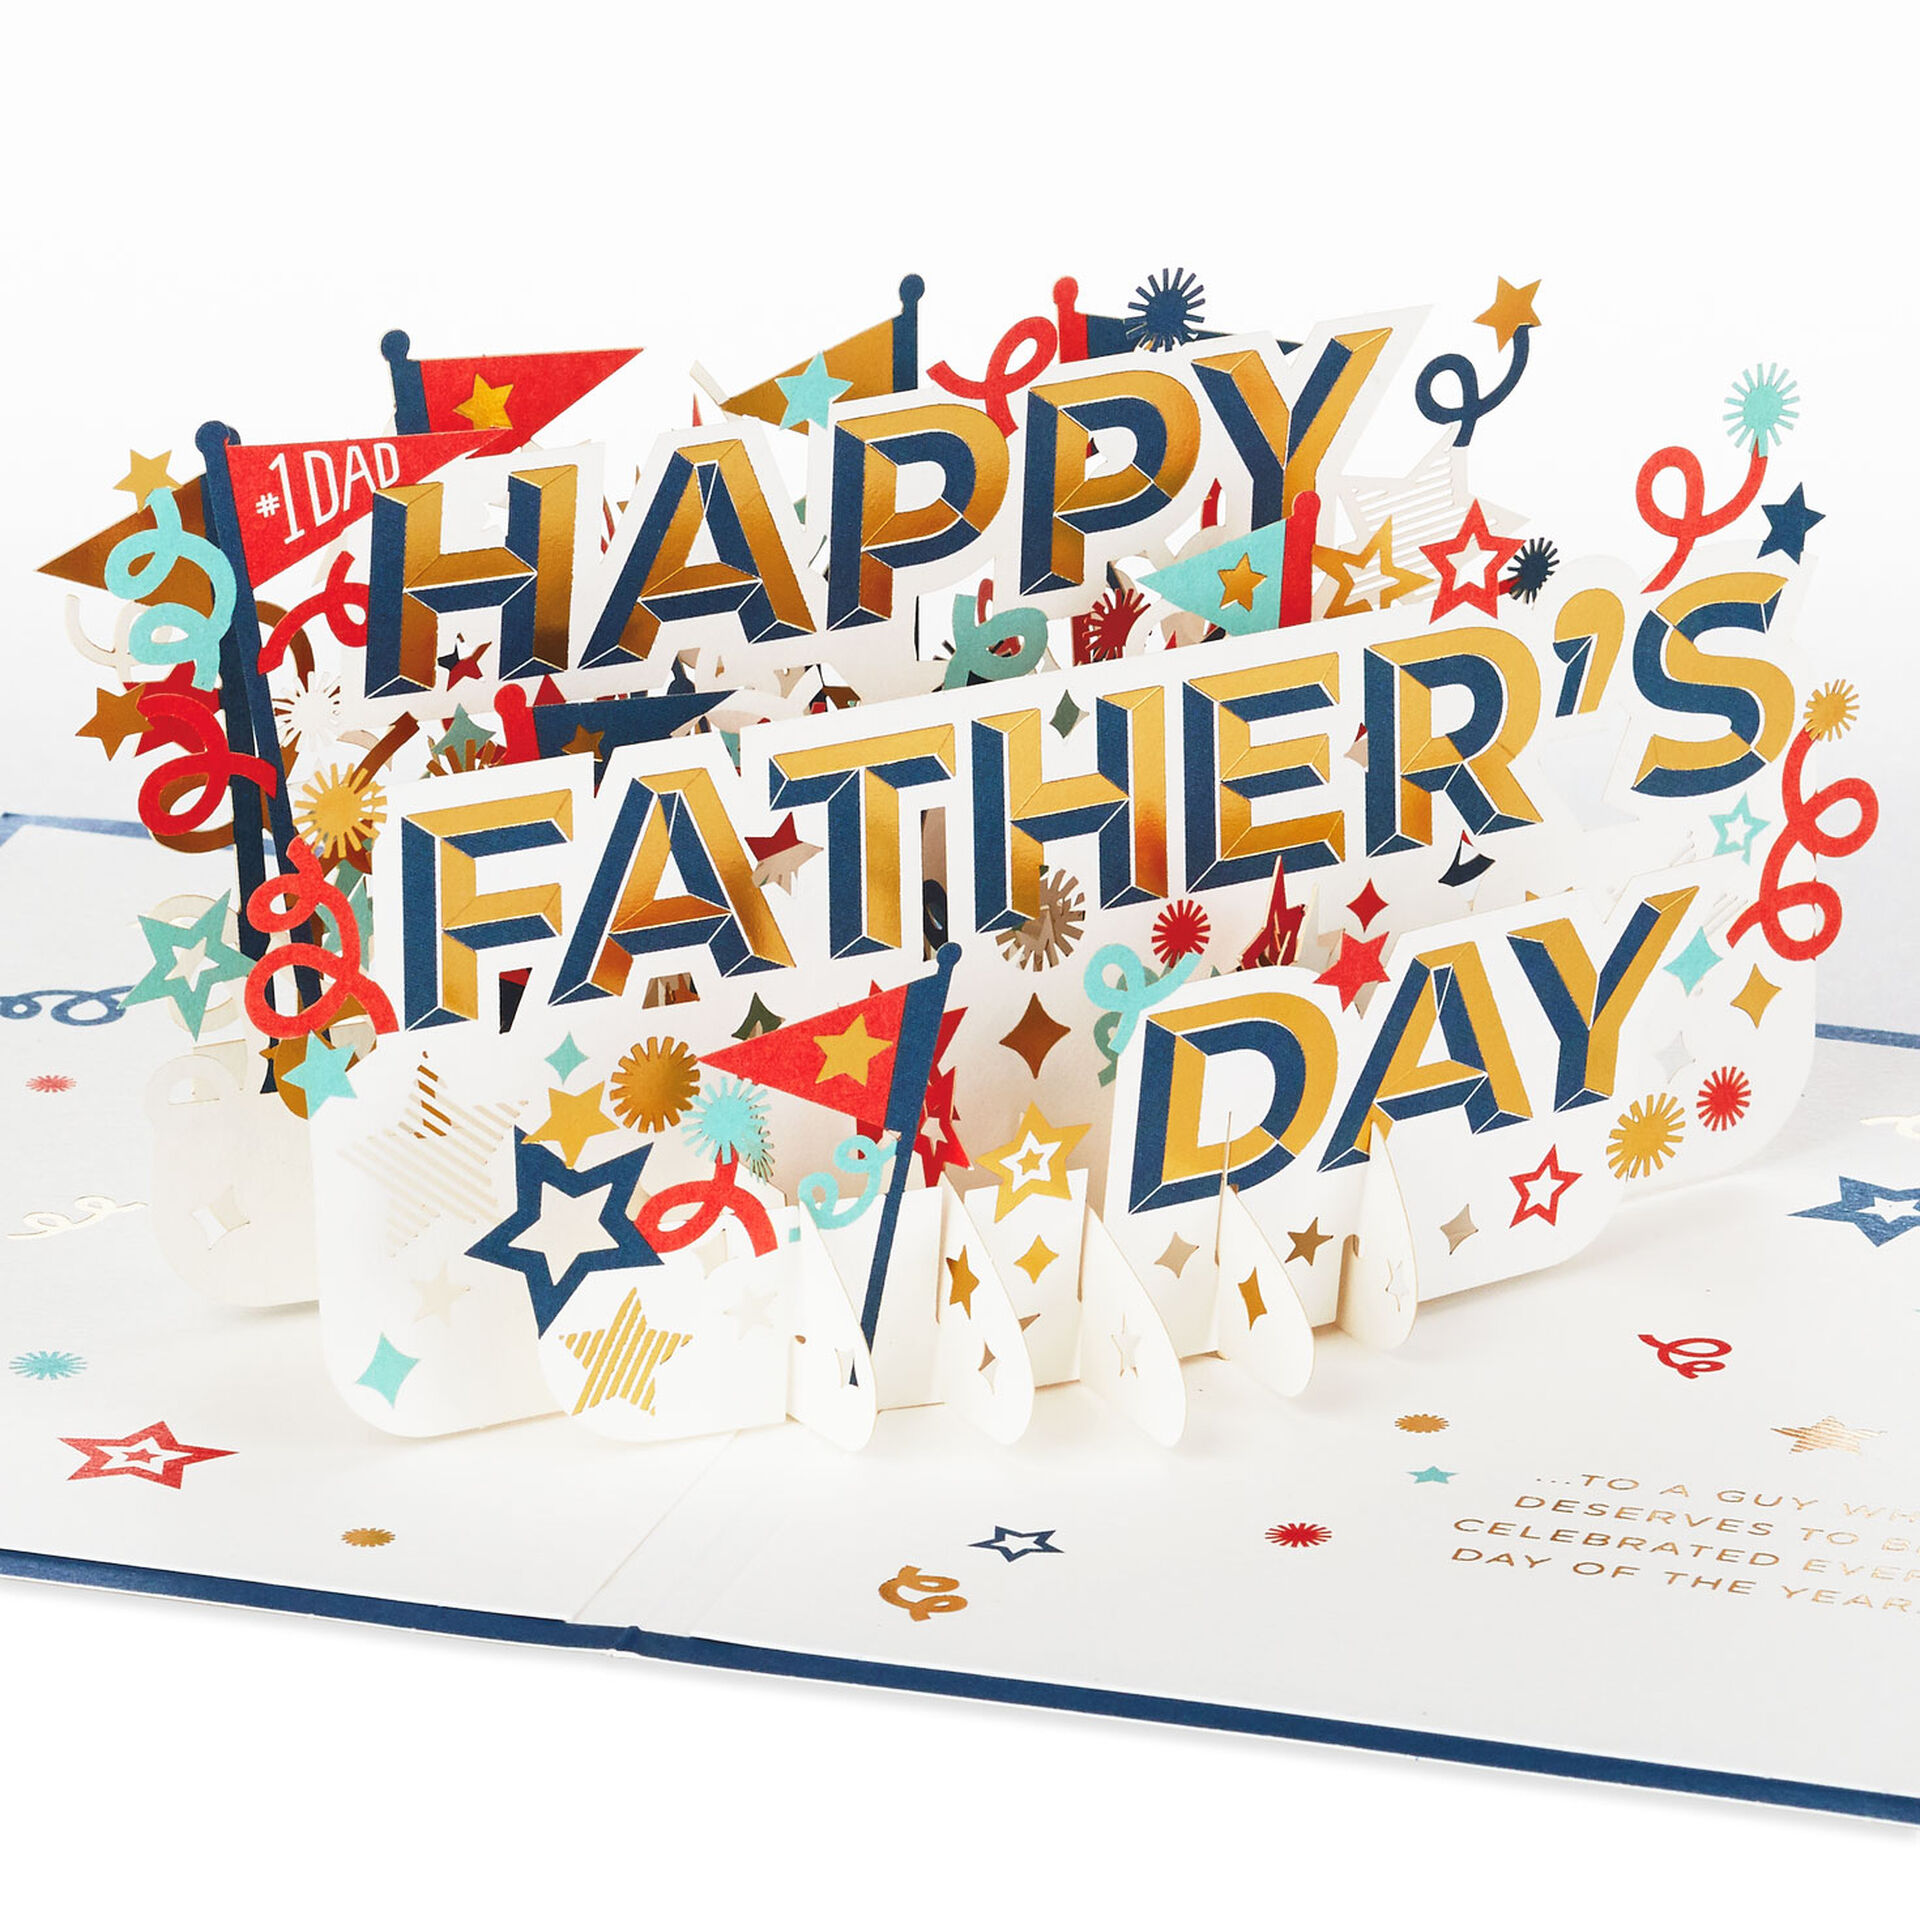 stars-and-pennants-3d-pop-up-father-s-day-card-greeting-cards-hallmark